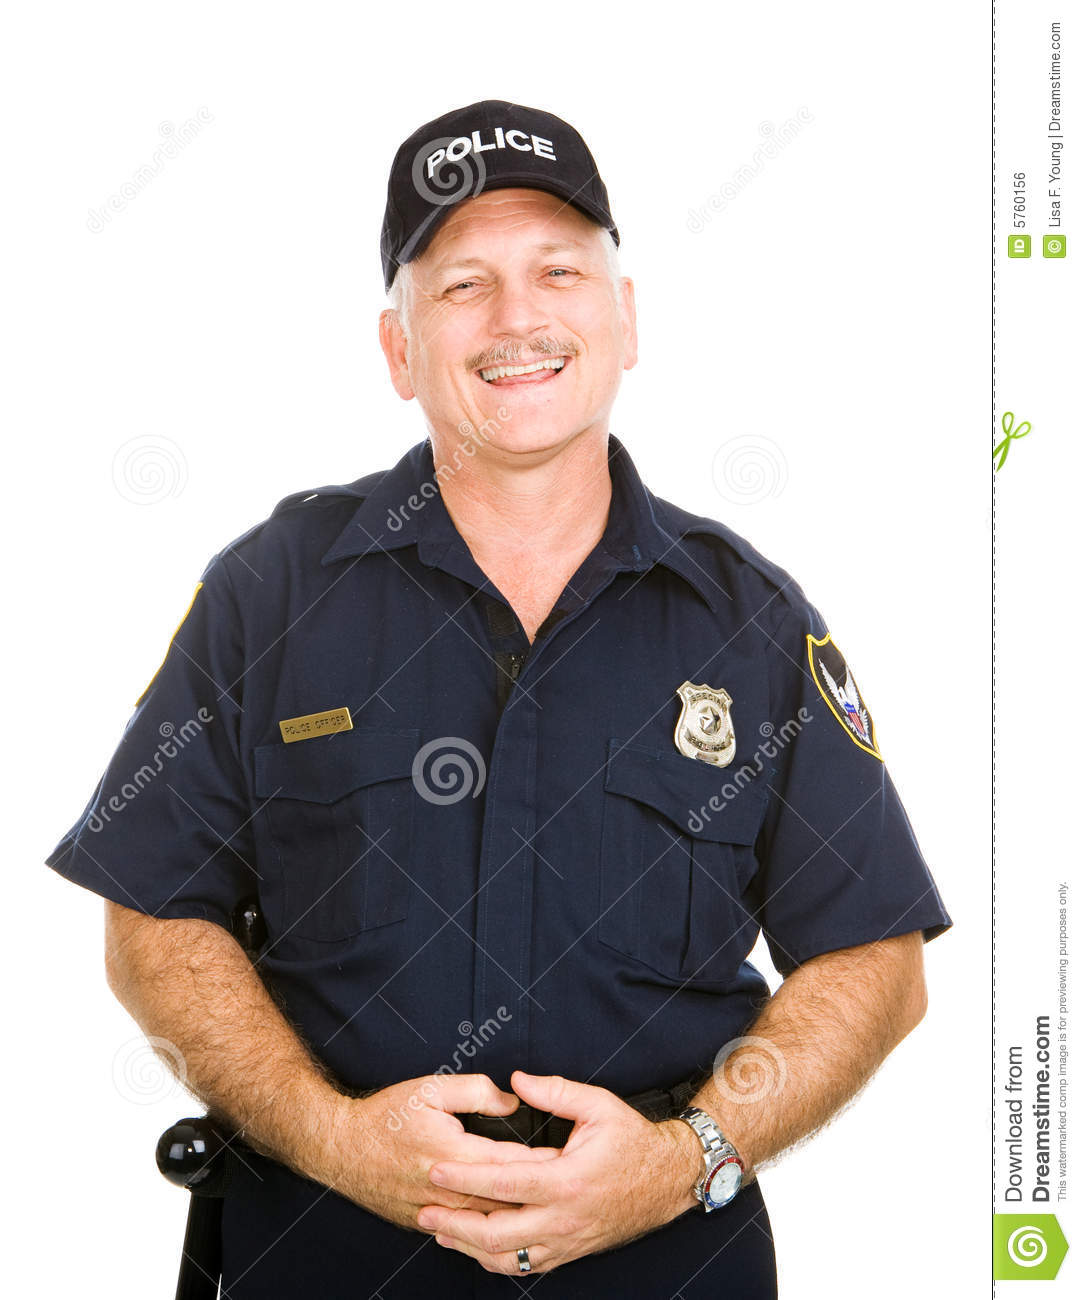 Friendly Jovial Police Officer Isolated Against A White Background